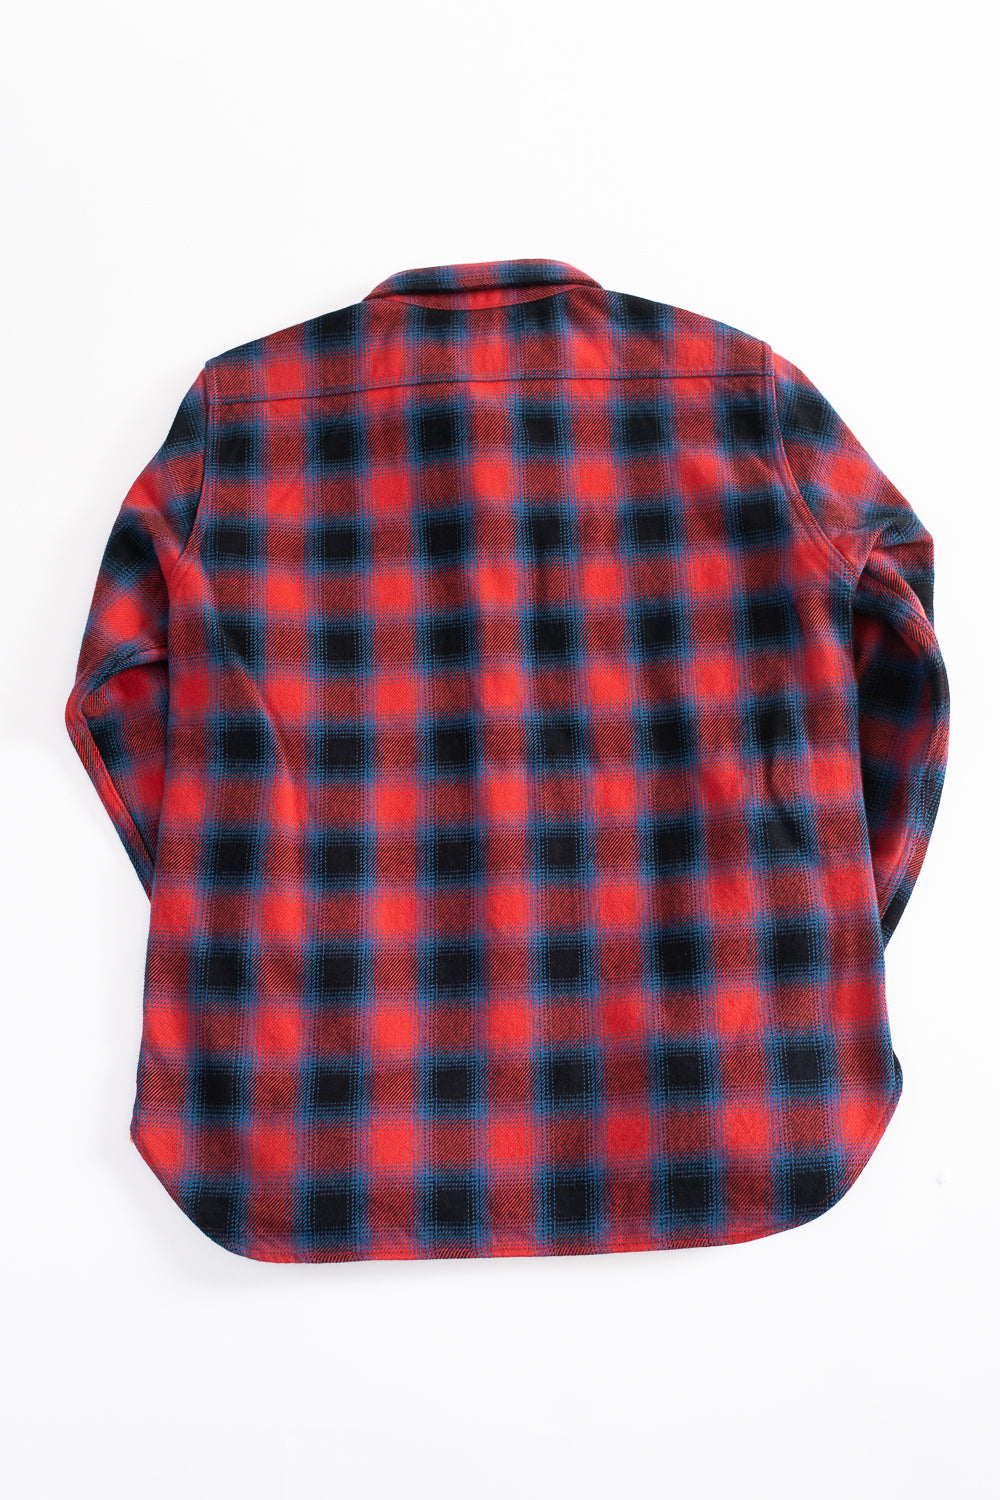 IHSH-379-RED - Ultra Heavy Flannel Ombré Check Work Shirt - Red